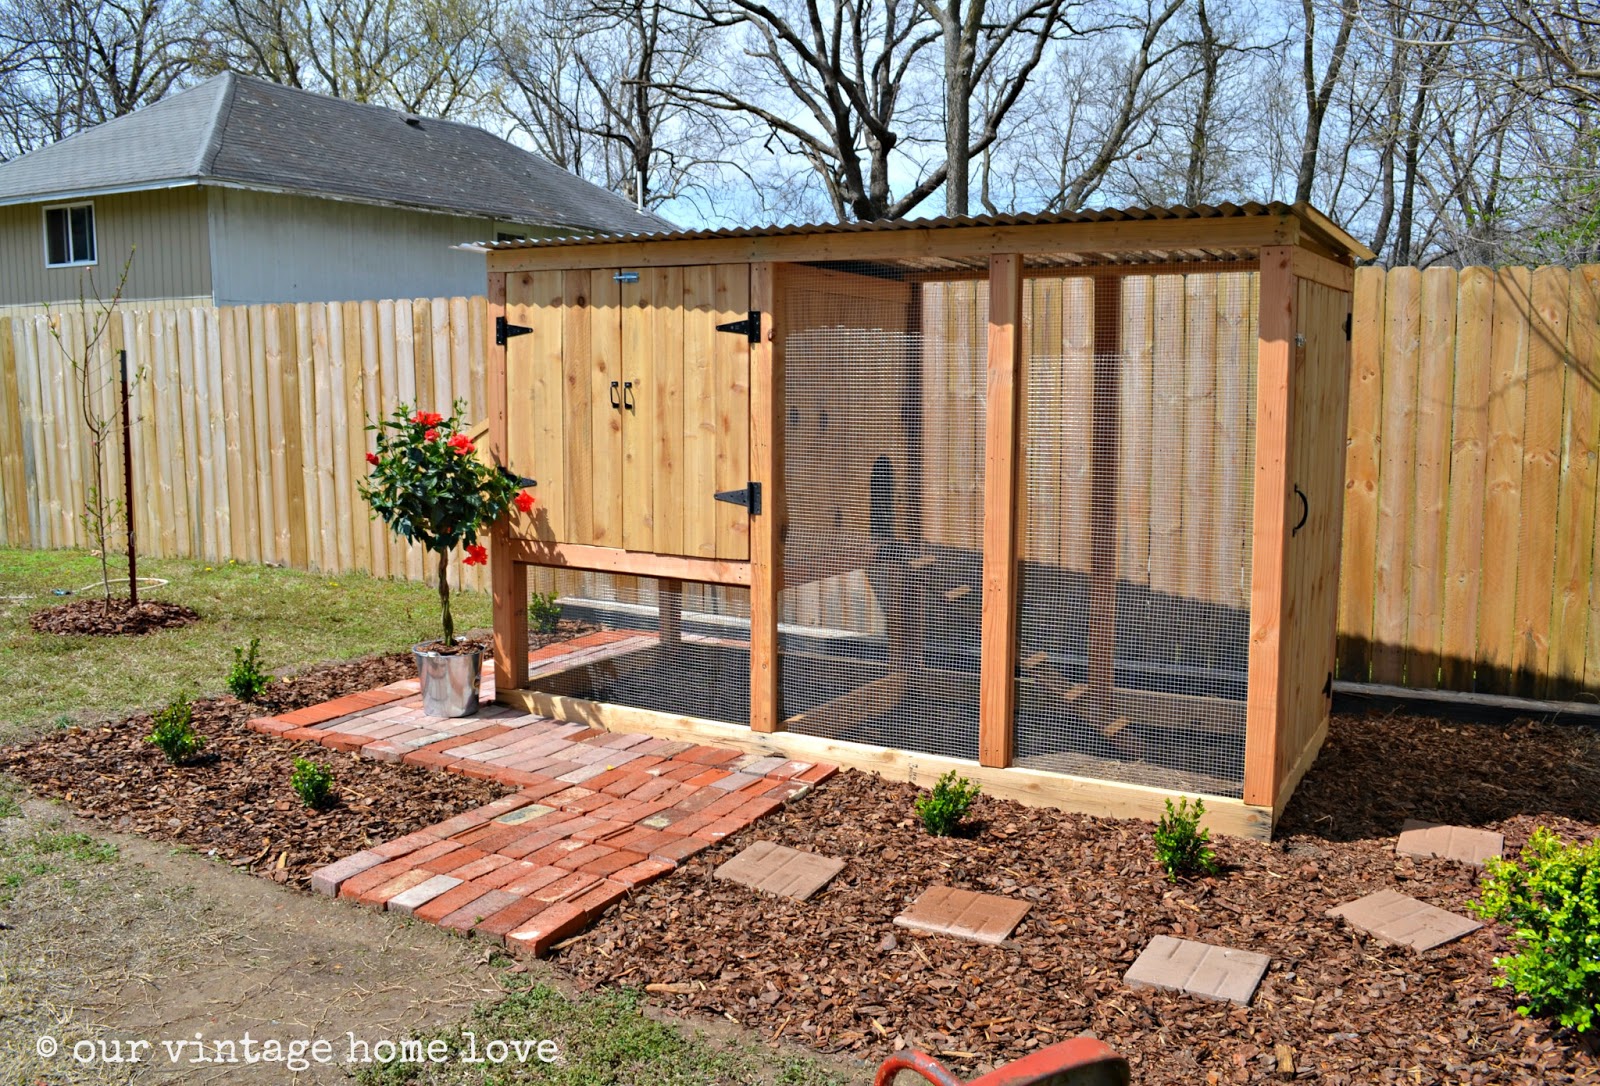 vintage home love: Our New Coop